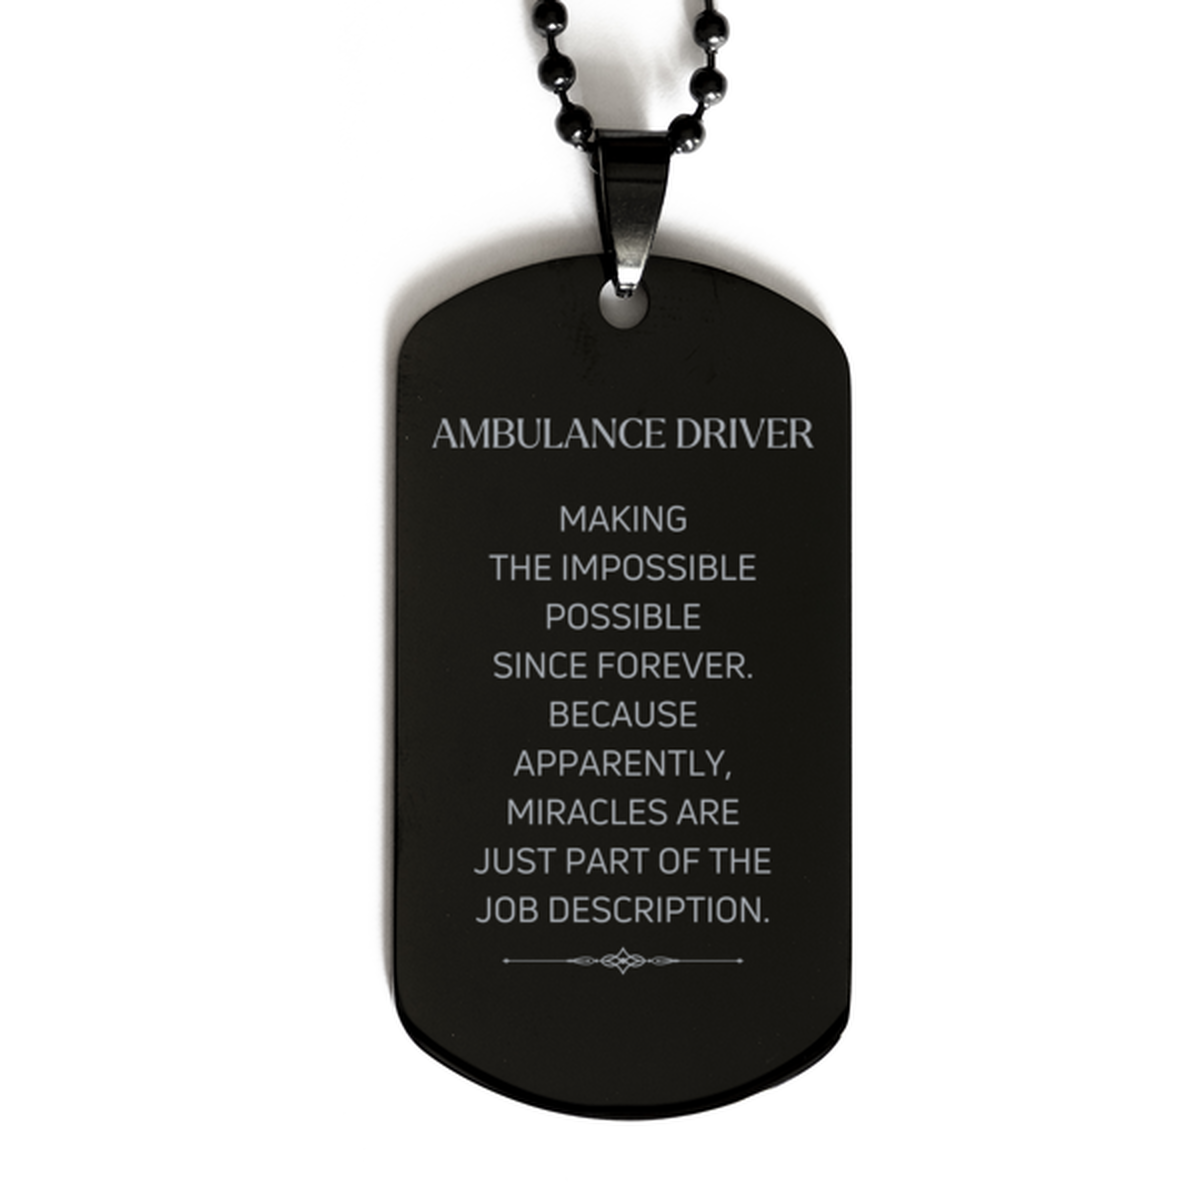 Funny Ambulance Driver Gifts, Miracles are just part of the job description, Inspirational Birthday Black Dog Tag For Ambulance Driver, Men, Women, Coworkers, Friends, Boss